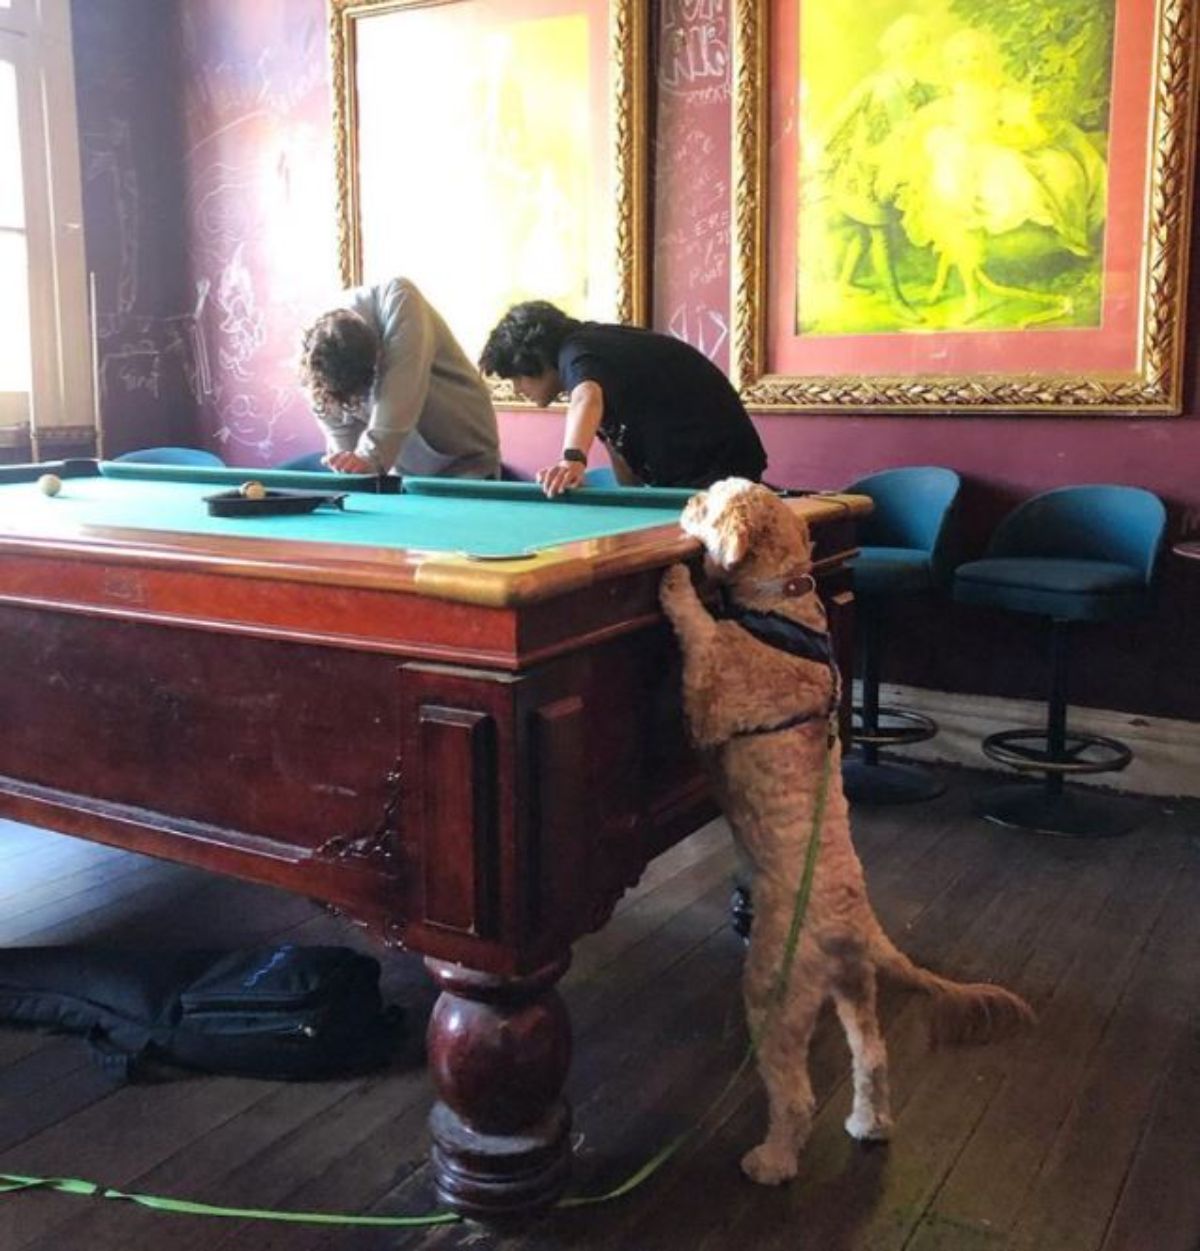 fluffy brown dog standing on hind legs and peeking over a grene pool table with two men on the other side